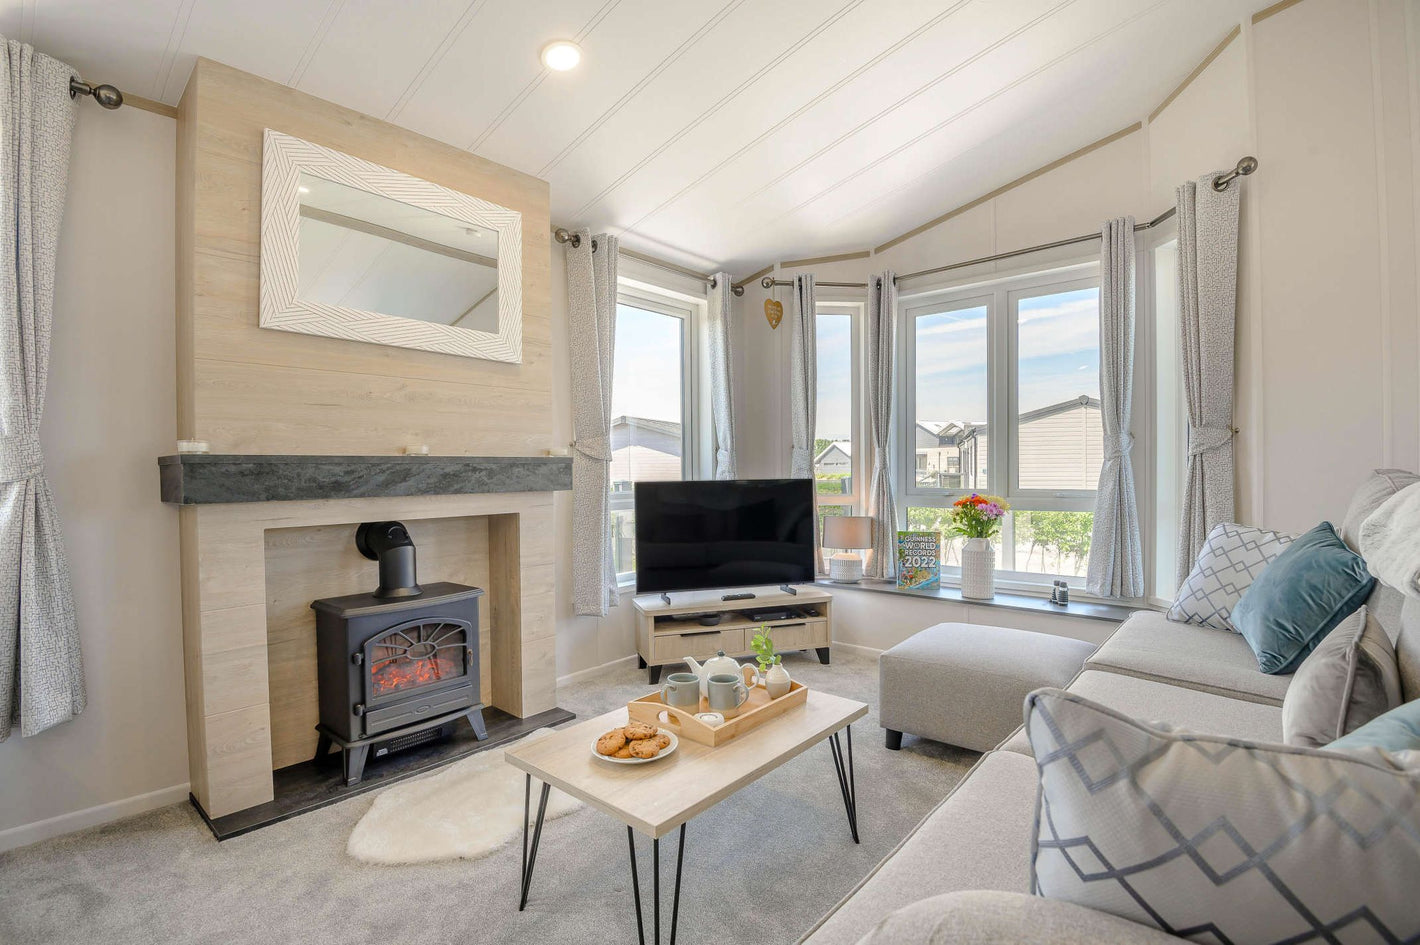 Luxury lodge in Brean Lounge area with Smart TV and Fire